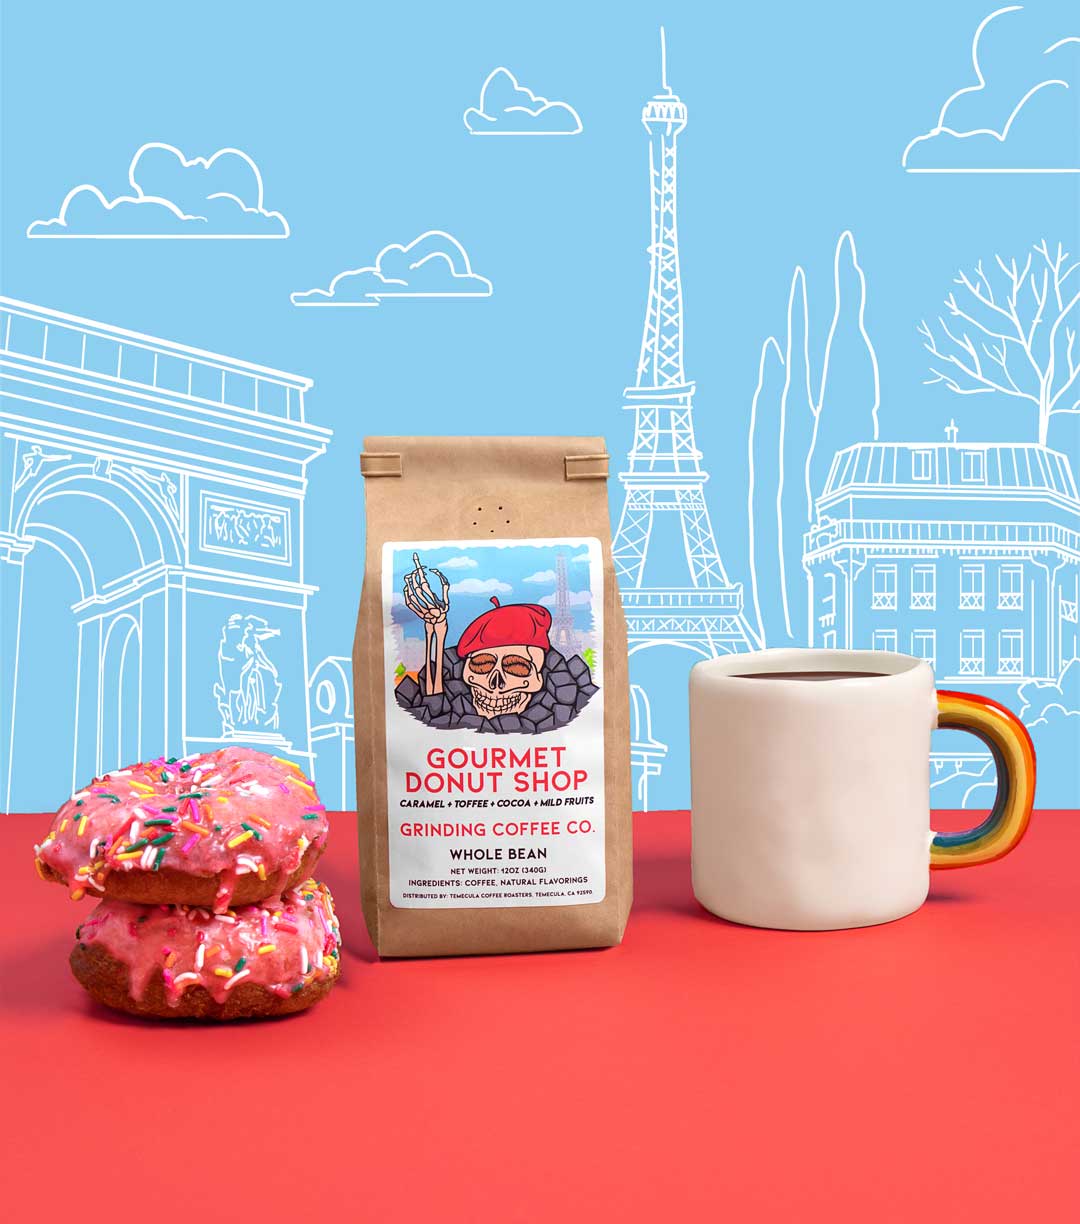 ecommerce product photo of grinding coffee bag with paris illustrated behind